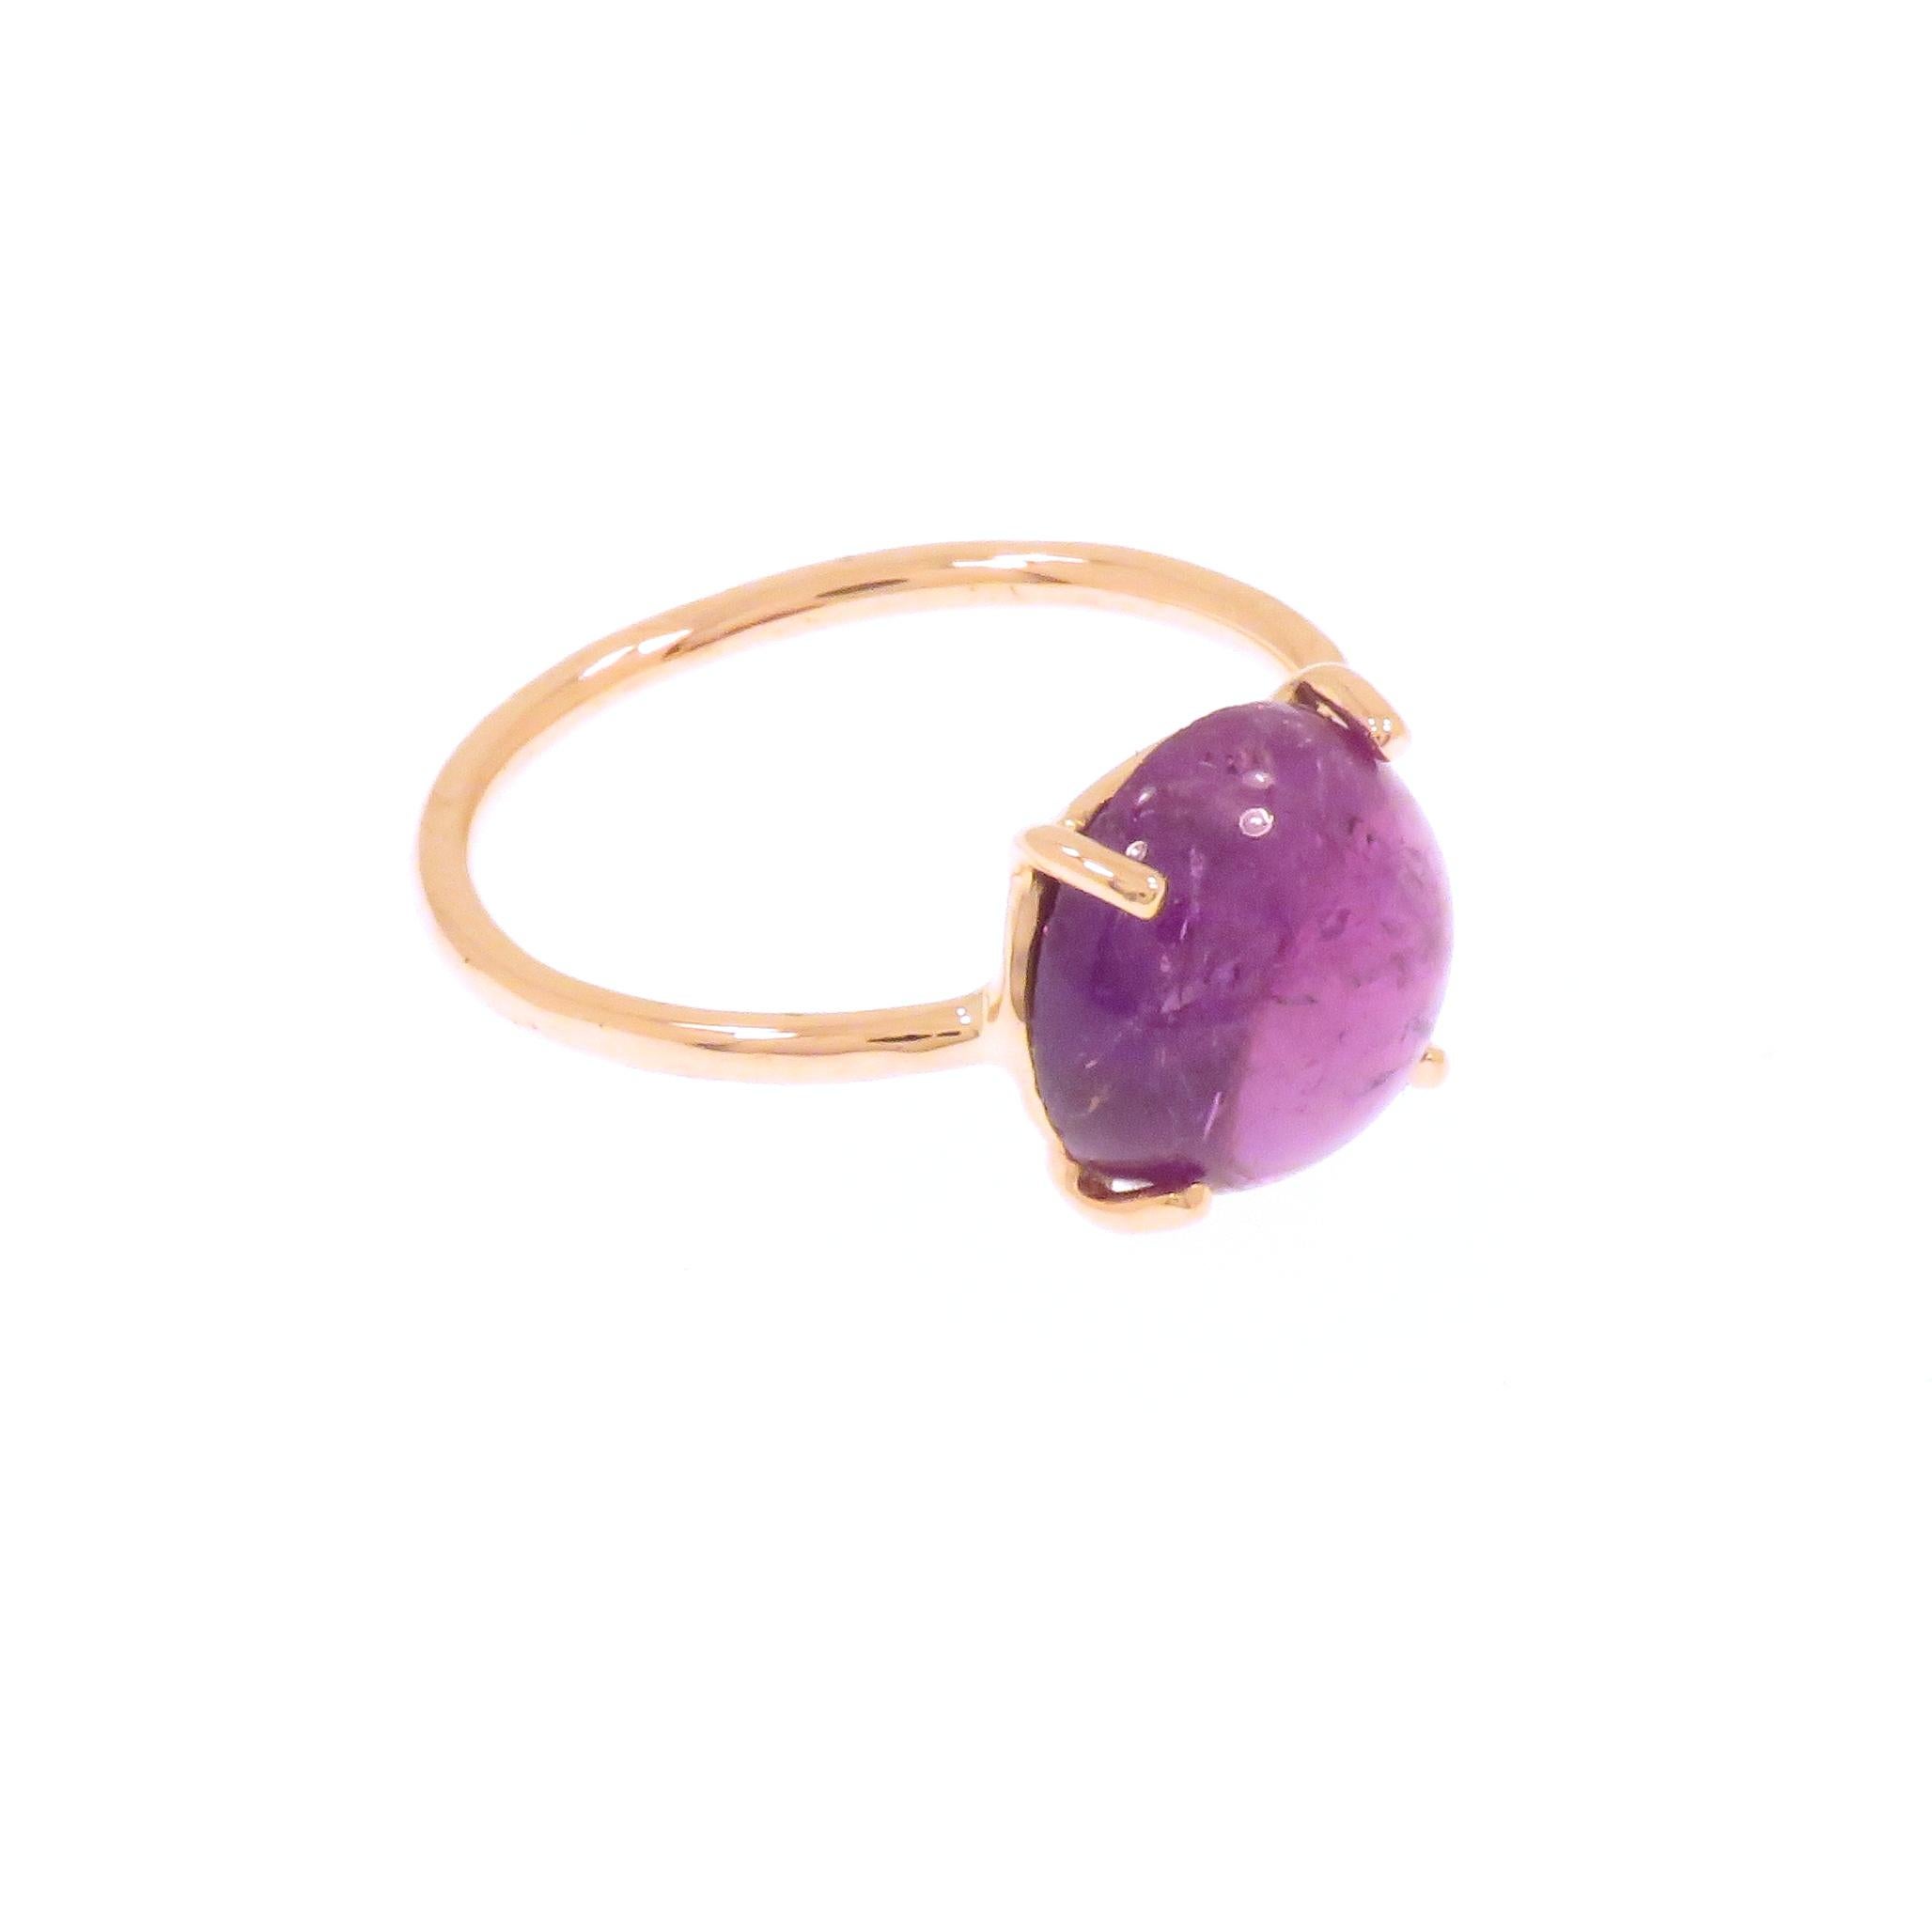 Bead Amethyst 9 Karat Rose Gold Ring Handcrafted in, Italy For Sale